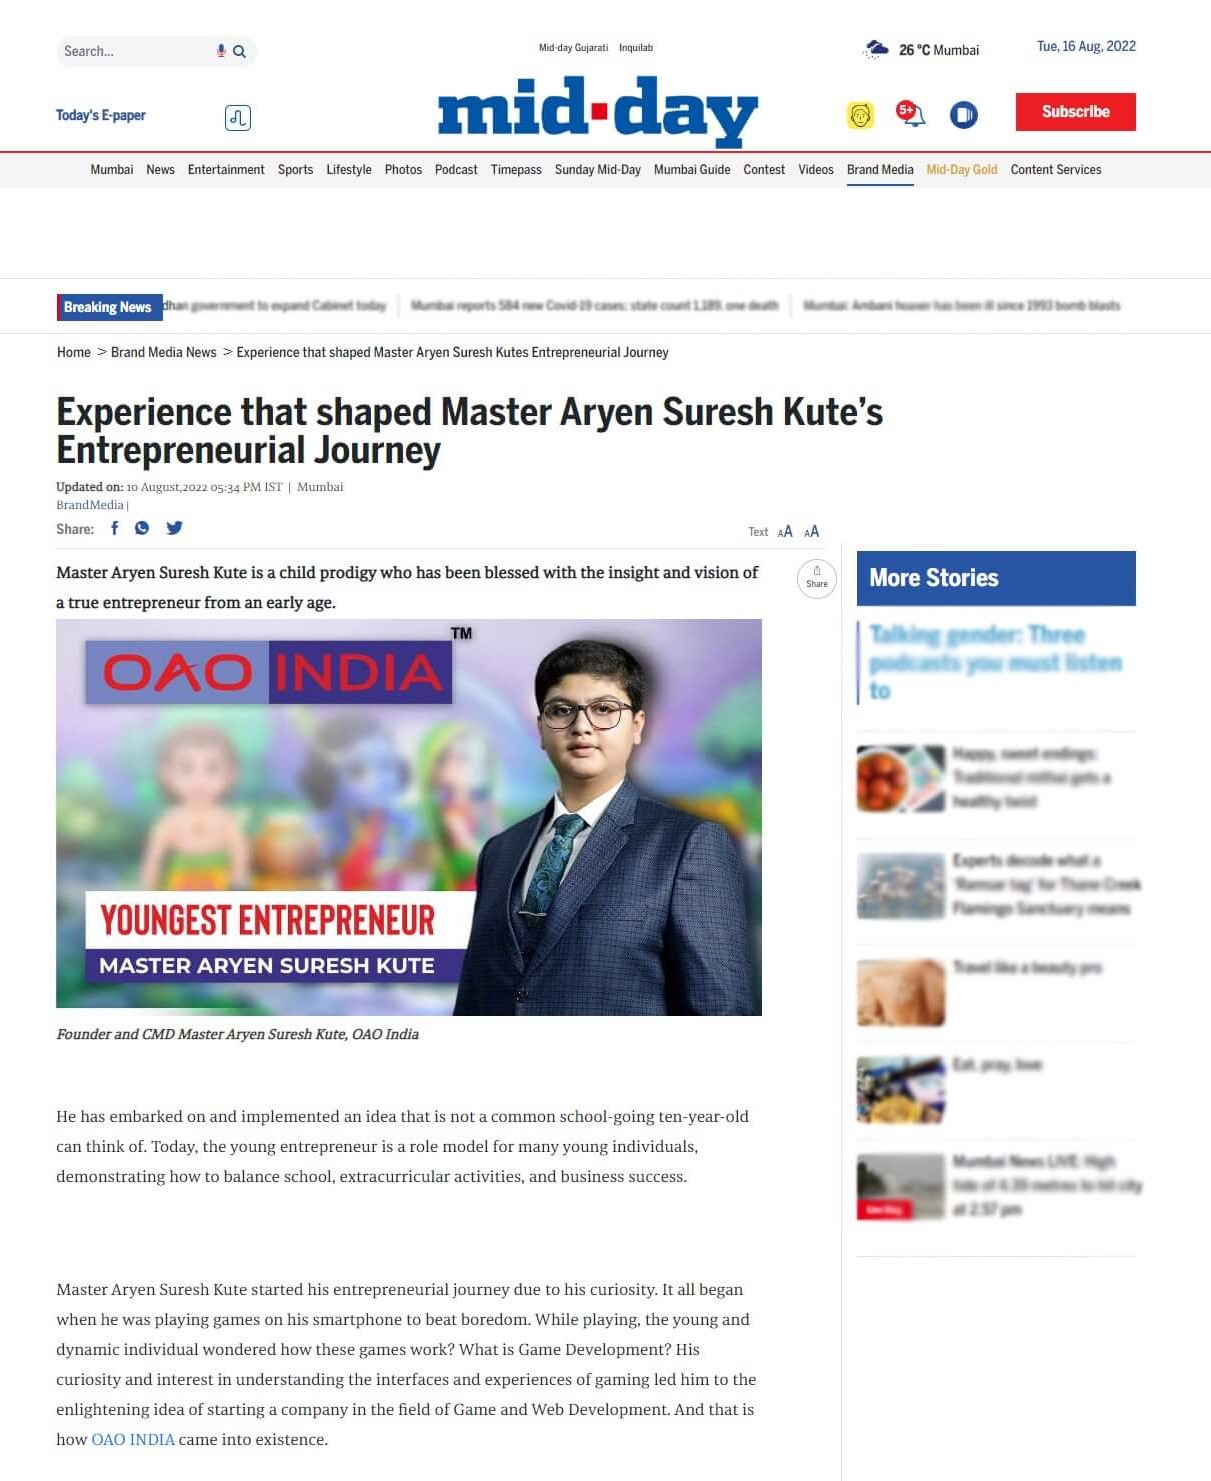 Entrepreneurial Journey of Master Aryen Suresh Kute (Founder & CMD-OAO INDIA) highlighted by Mid-Day Newspaper